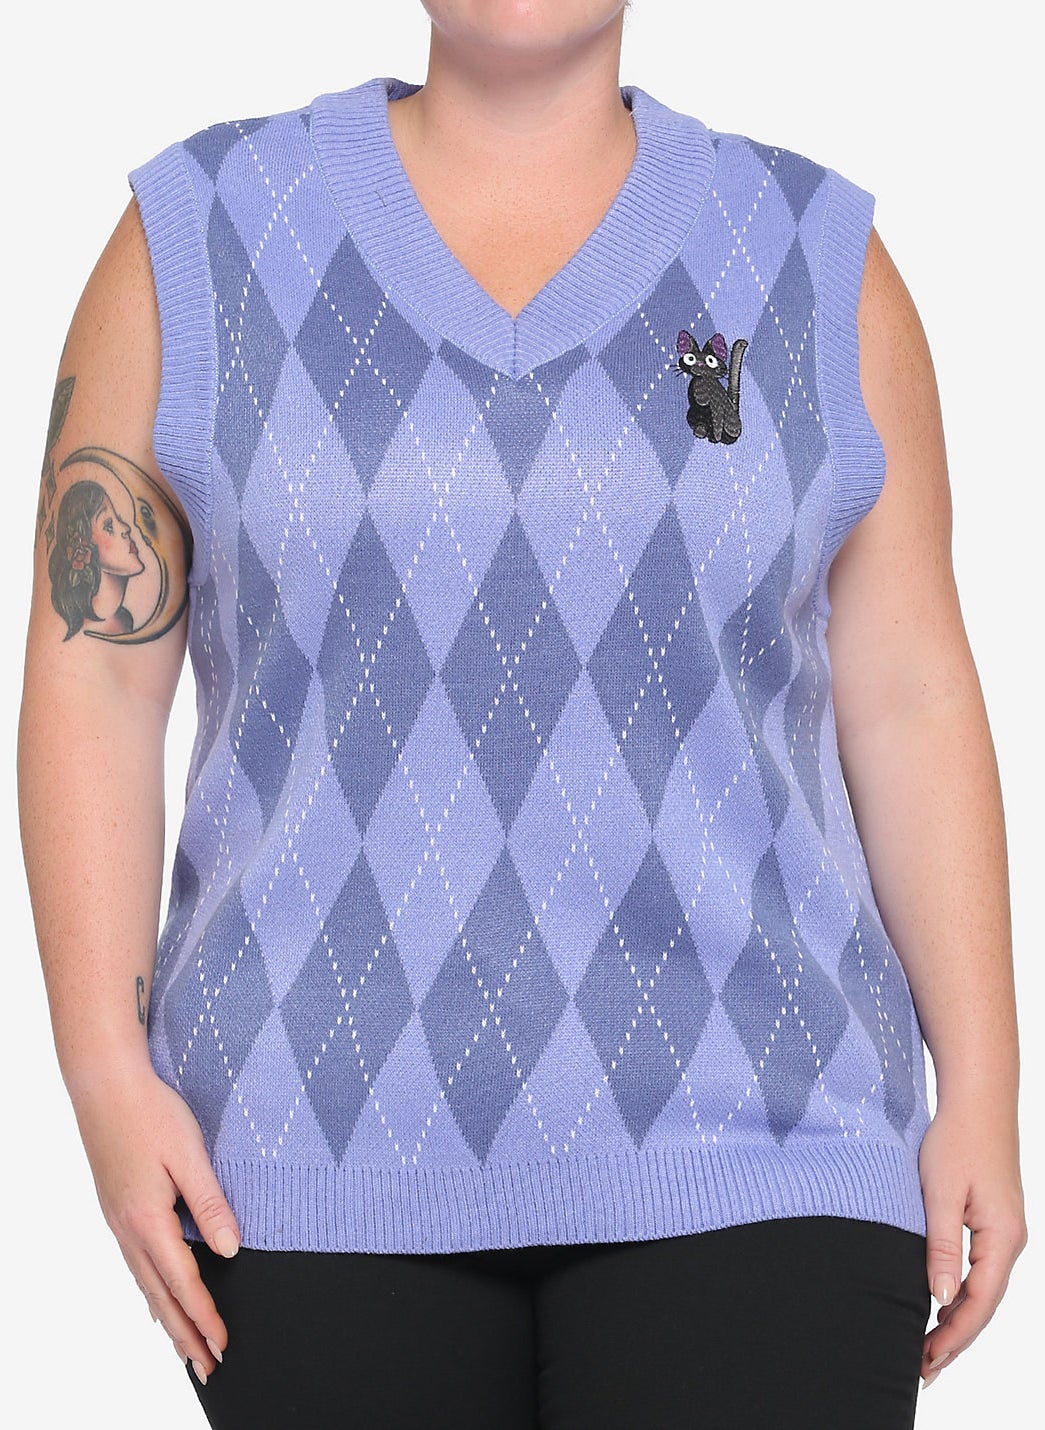 model in periwinkle argyle sweater vest with jiji on the left side of their chest